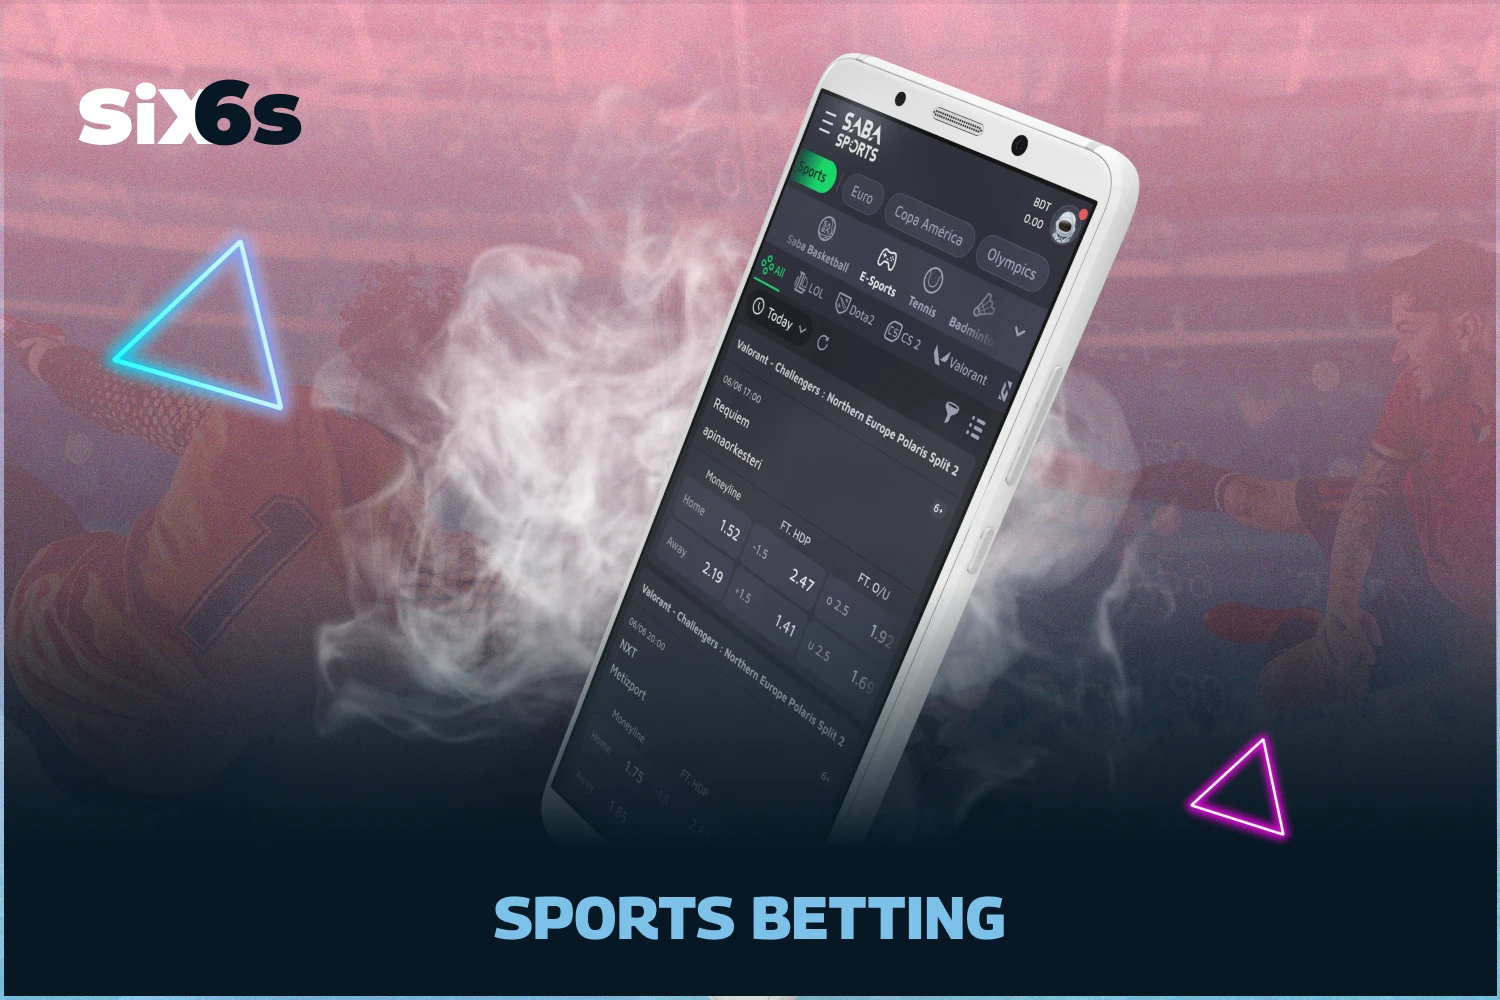 Six6s bet app has a lot of options for sports betting enthusiasts